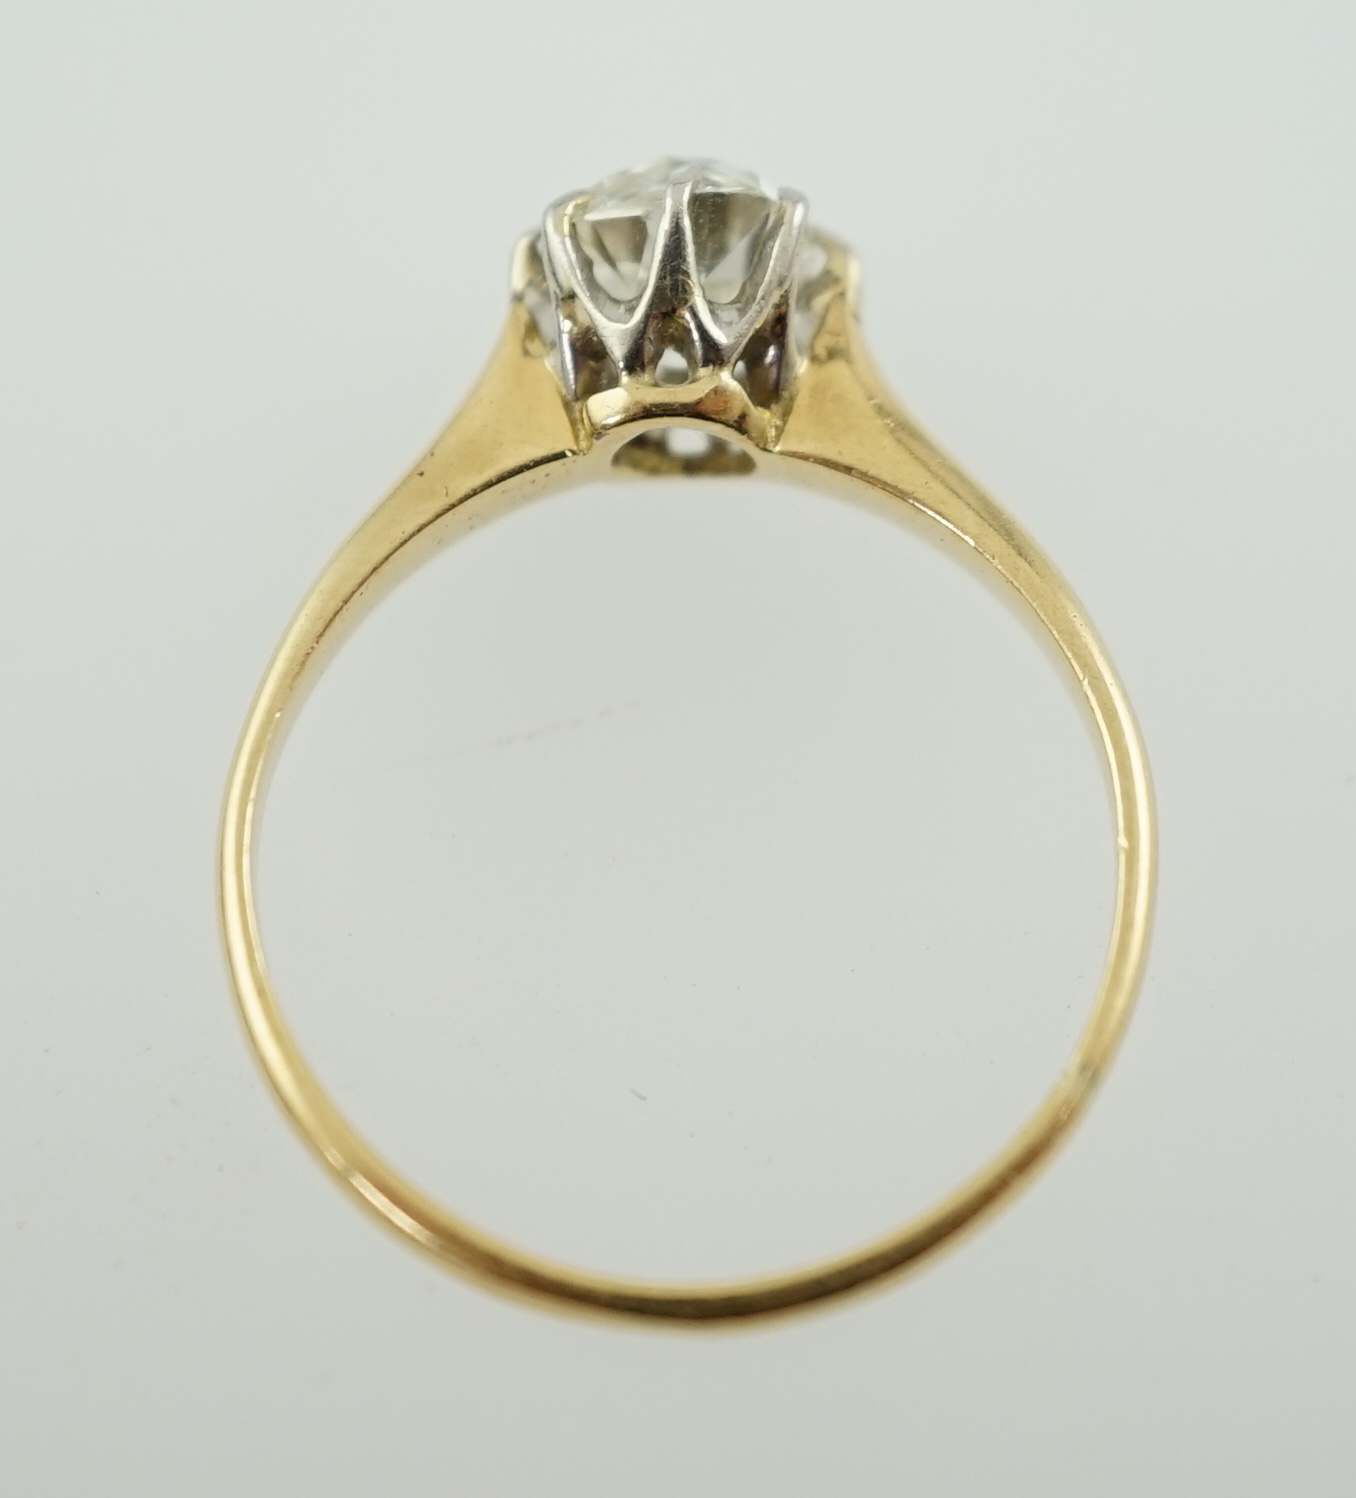 A gold and cushion cut solitaire diamond set ring